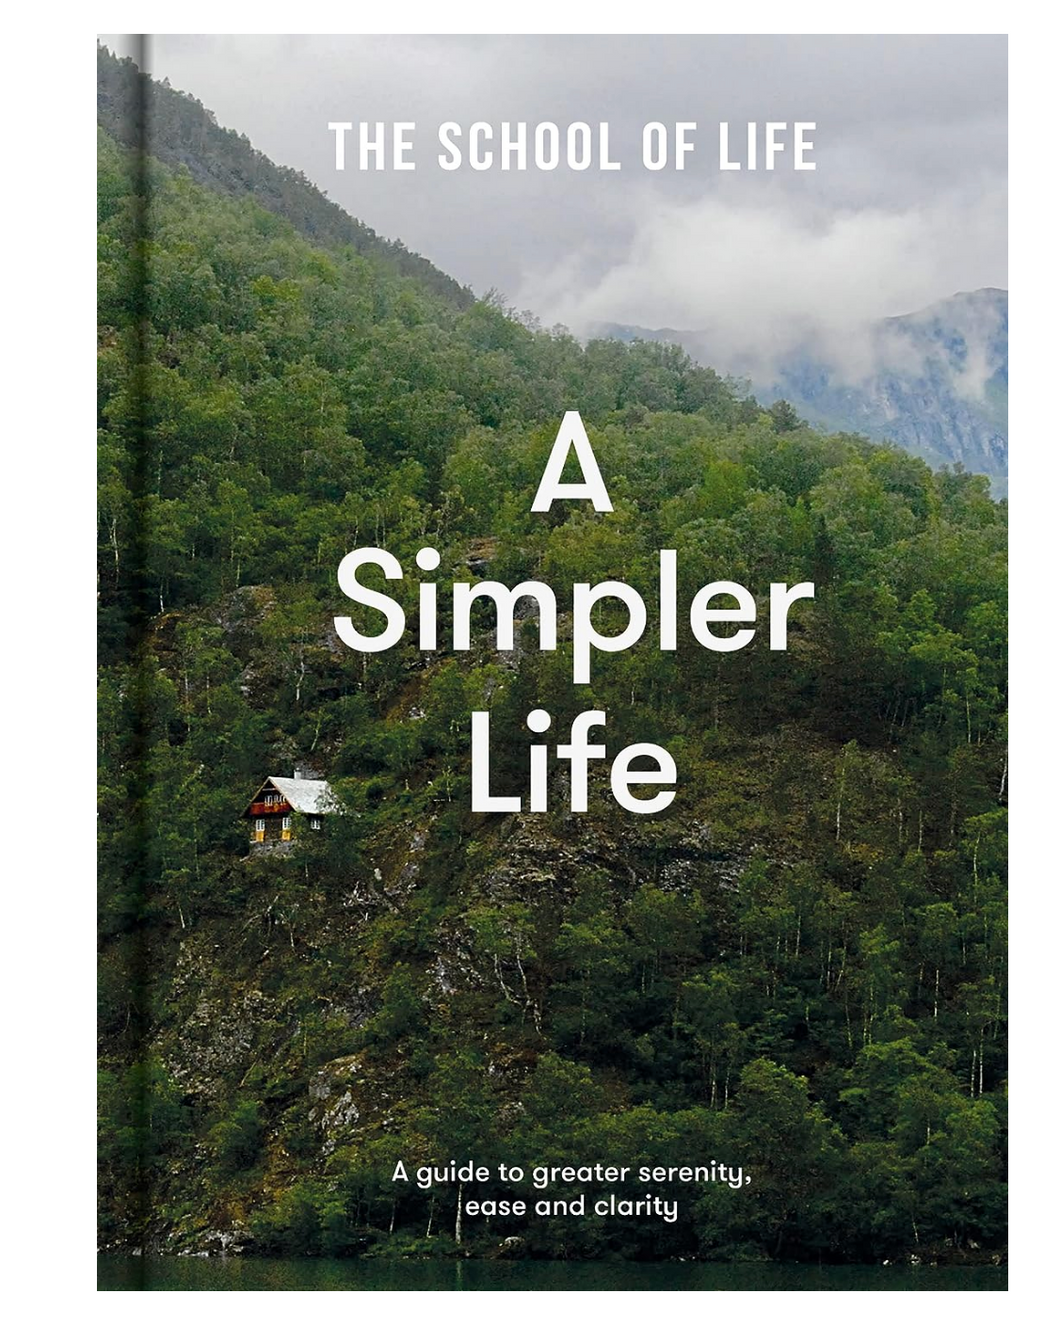 The School of Life : A simpler life